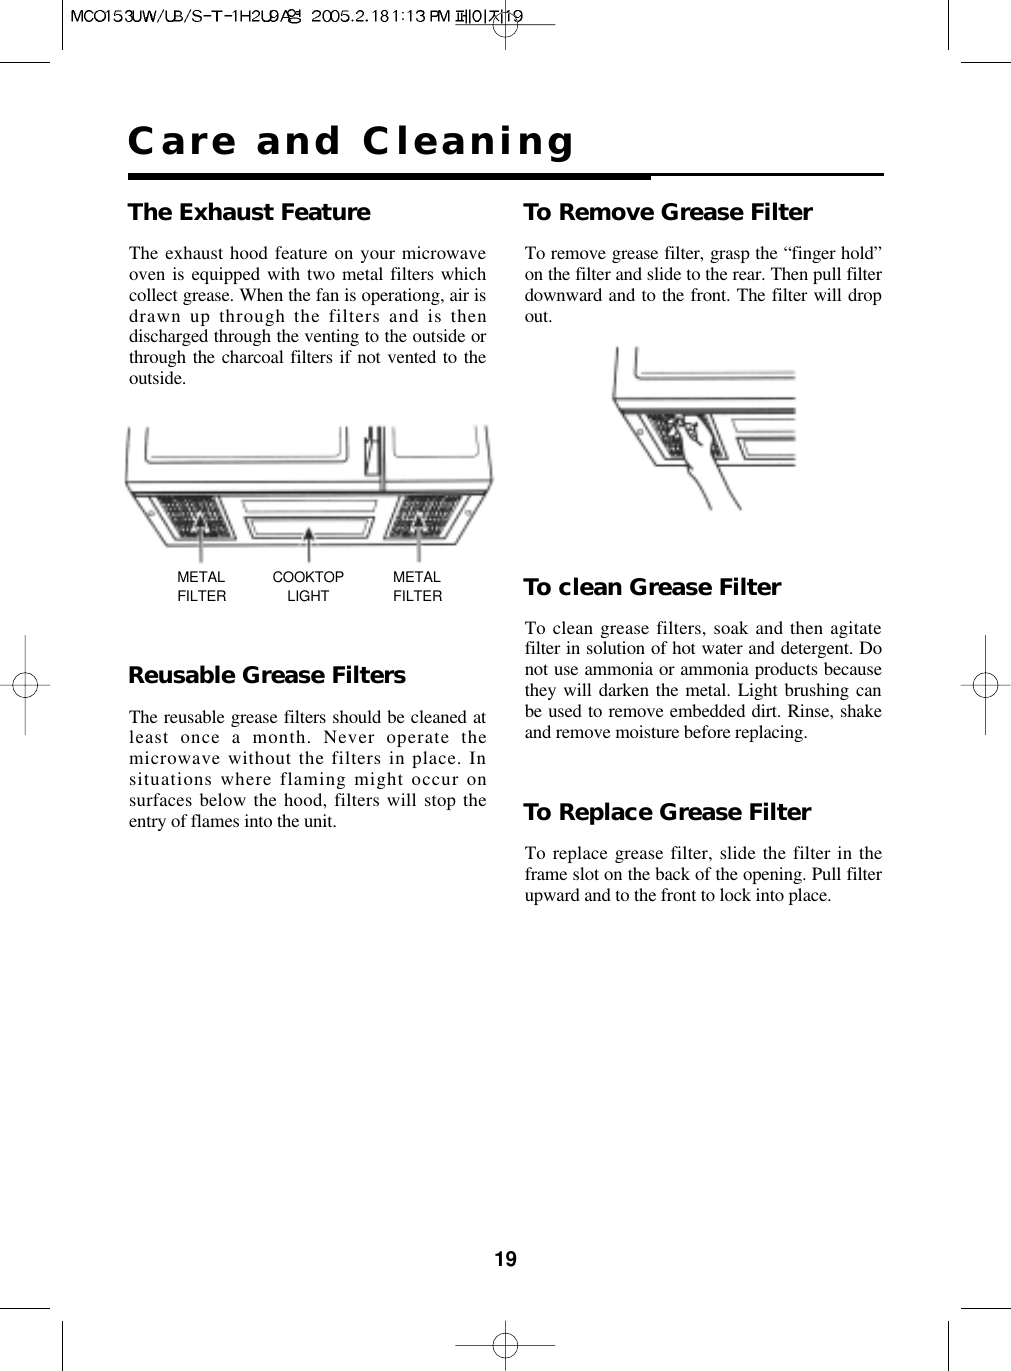 19Care and CleaningThe Exhaust Feature To Remove Grease FilterTo remove grease filter, grasp the “finger hold”on the filter and slide to the rear. Then pull filterdownward and to the front. The filter will dropout.To clean Grease FilterTo clean grease filters, soak and then agitatefilter in solution of hot water and detergent. Donot use ammonia or ammonia products becausethey will darken the metal. Light brushing canbe used to remove embedded dirt. Rinse, shakeand remove moisture before replacing.To Replace Grease FilterTo replace grease filter, slide the filter in theframe slot on the back of the opening. Pull filterupward and to the front to lock into place.Reusable Grease FiltersThe reusable grease filters should be cleaned atleast once a month. Never operate themicrowave without the filters in place. Insituations where flaming might occur onsurfaces below the hood, filters will stop theentry of flames into the unit.METALFILTERMETALFILTERCOOKTOPLIGHTThe exhaust hood feature on your microwaveoven is equipped with two metal filters whichcollect grease. When the fan is operationg, air isdrawn up through the filters and is thendischarged through the venting to the outside orthrough the charcoal filters if not vented to theoutside.